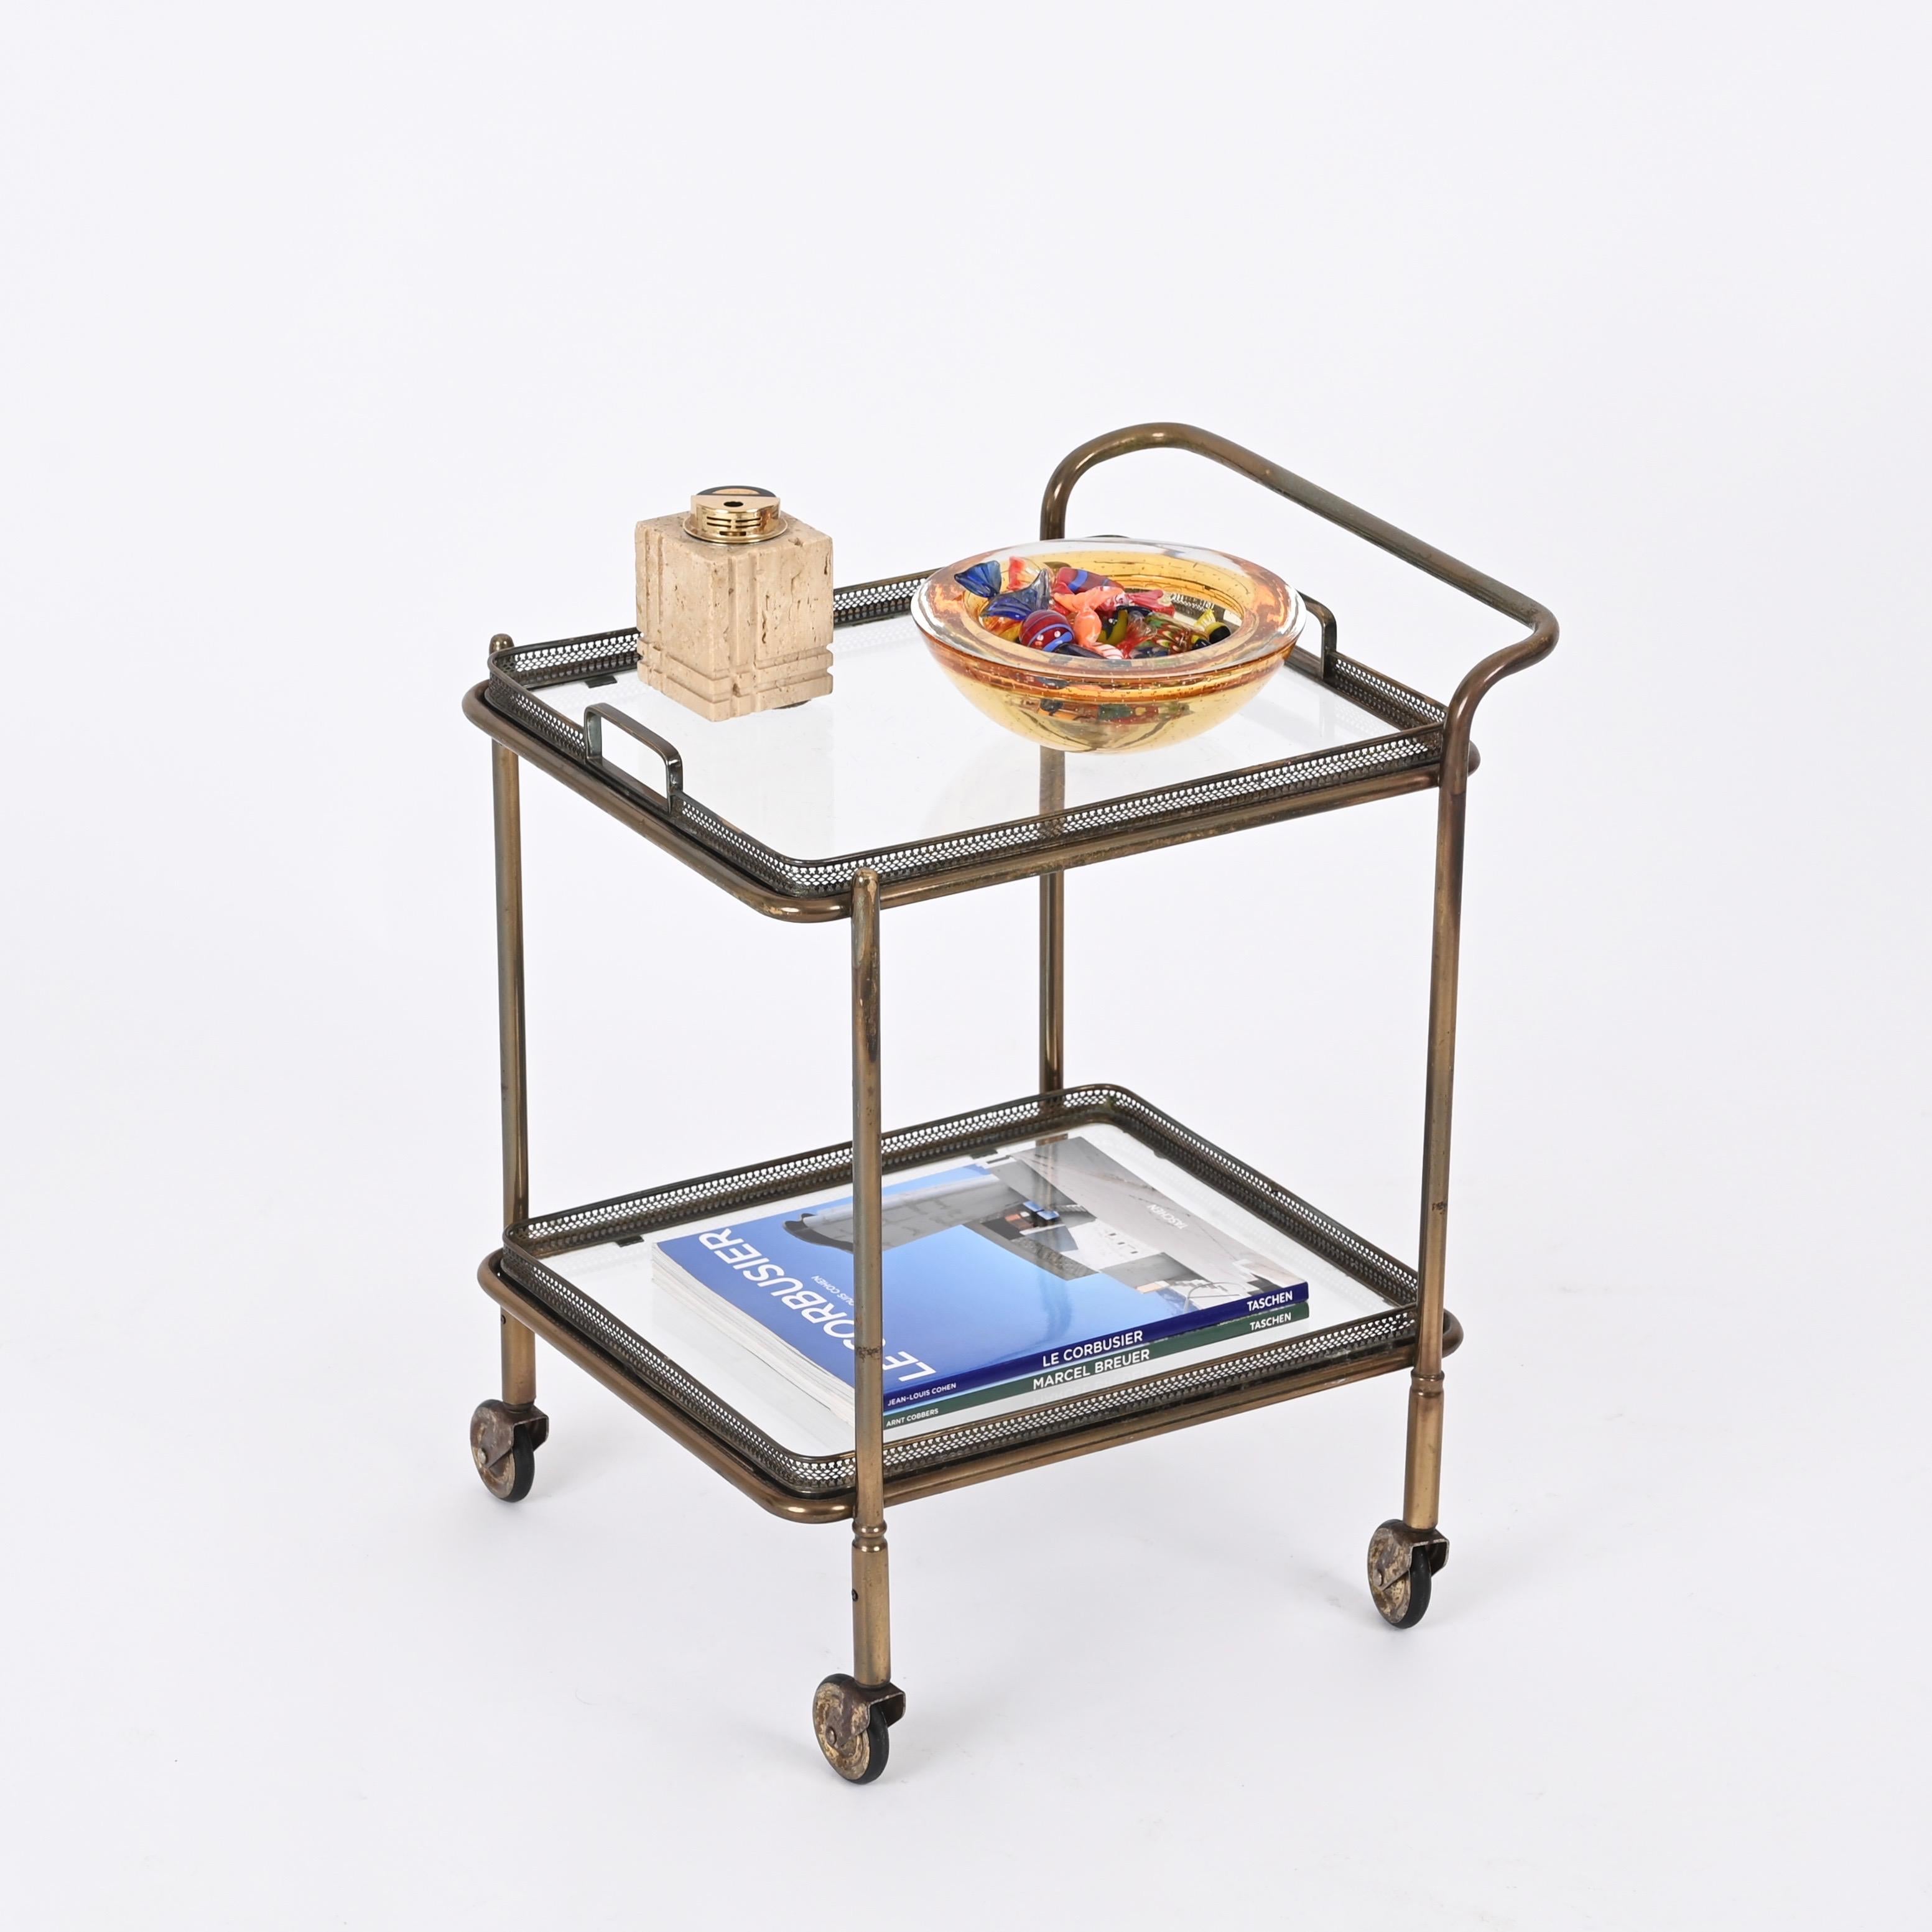 Fantastic Mid-Century serving bar cart in solid brass and crystal glas. Maison Jansen produced this cosy serving trolley in France during the 1950s .

This lovely object is unique thanks to its small dimensions and perfect proportions. It has two